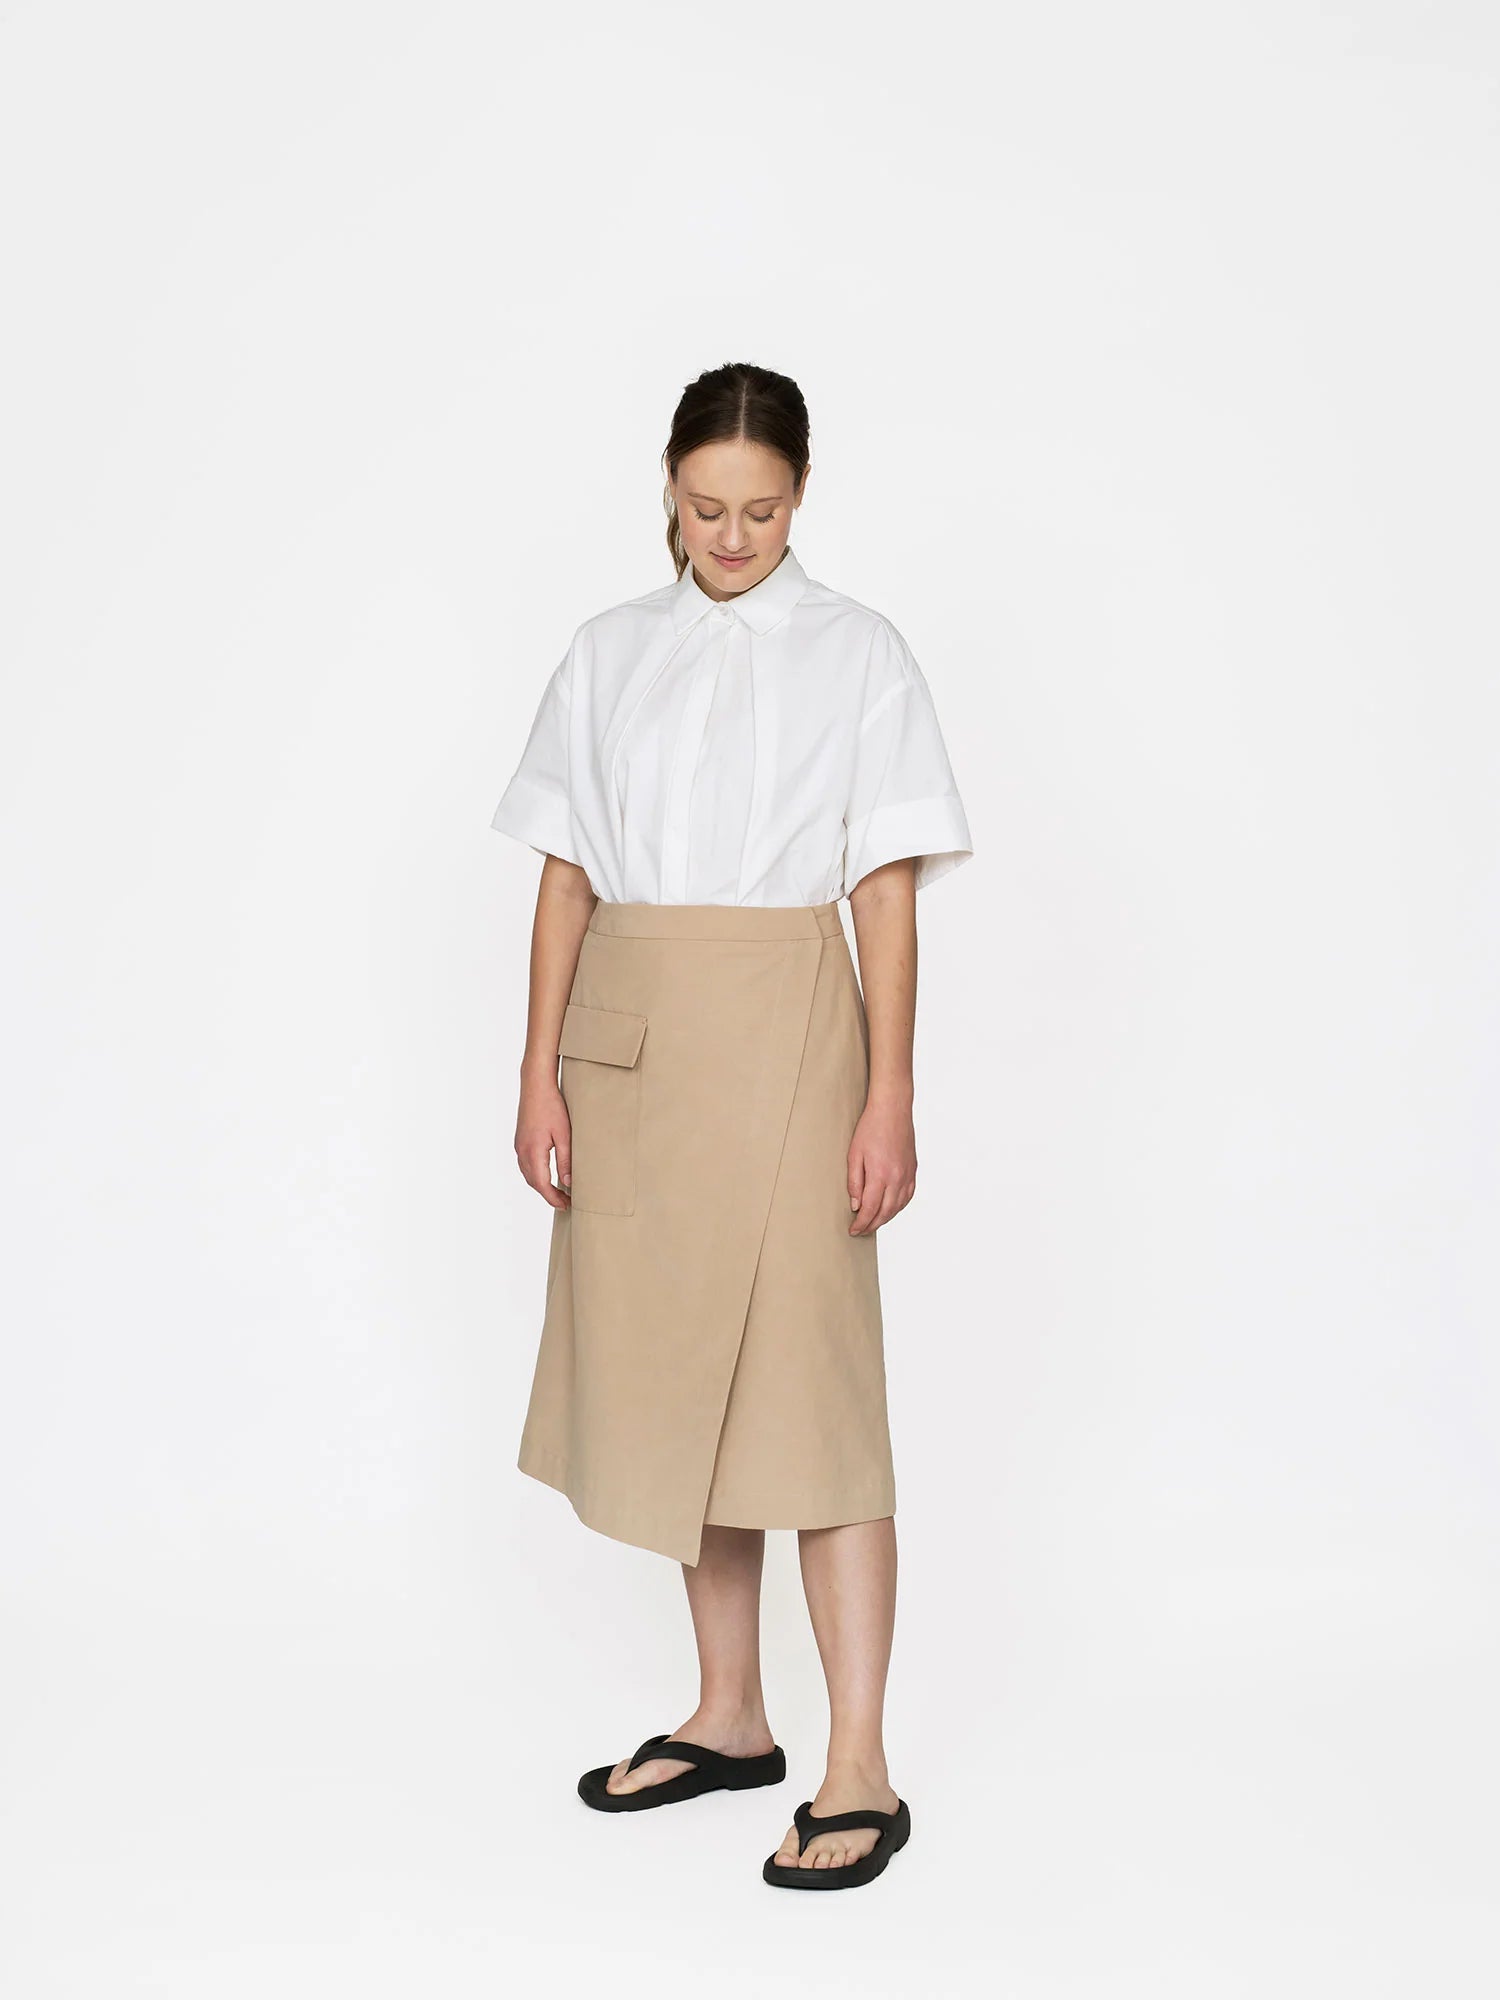 Asymmetric Midi Skirt sewing pattern by The Assembly Line